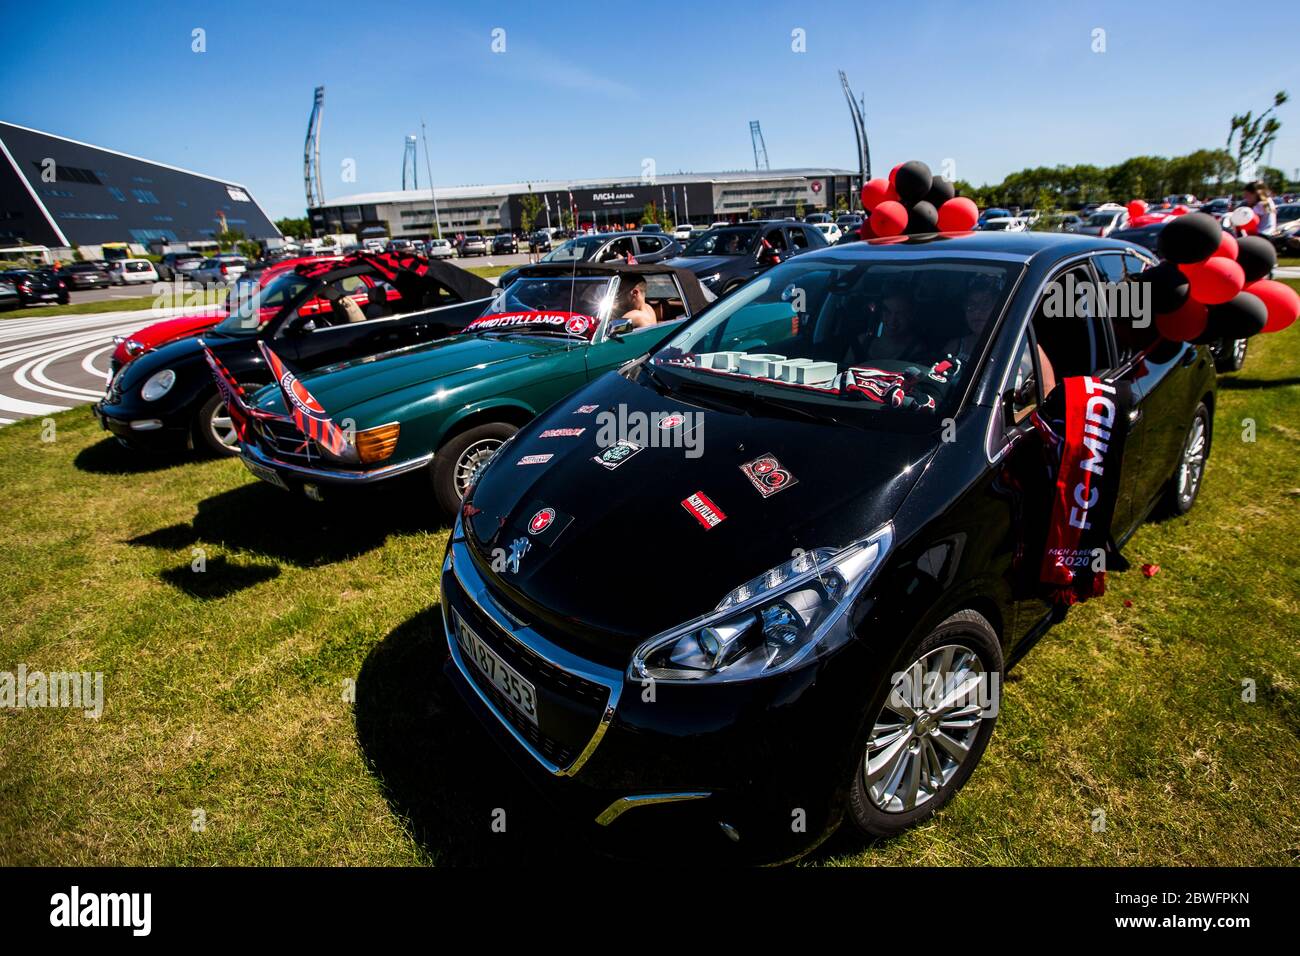 Herning, Denmark. 01st June, 2020. Fans of the Danish league leaders FC  Midtjylland support the team from their cars when the Danish Superliga  match between FC Midtjylland and AC Horsens takes place.